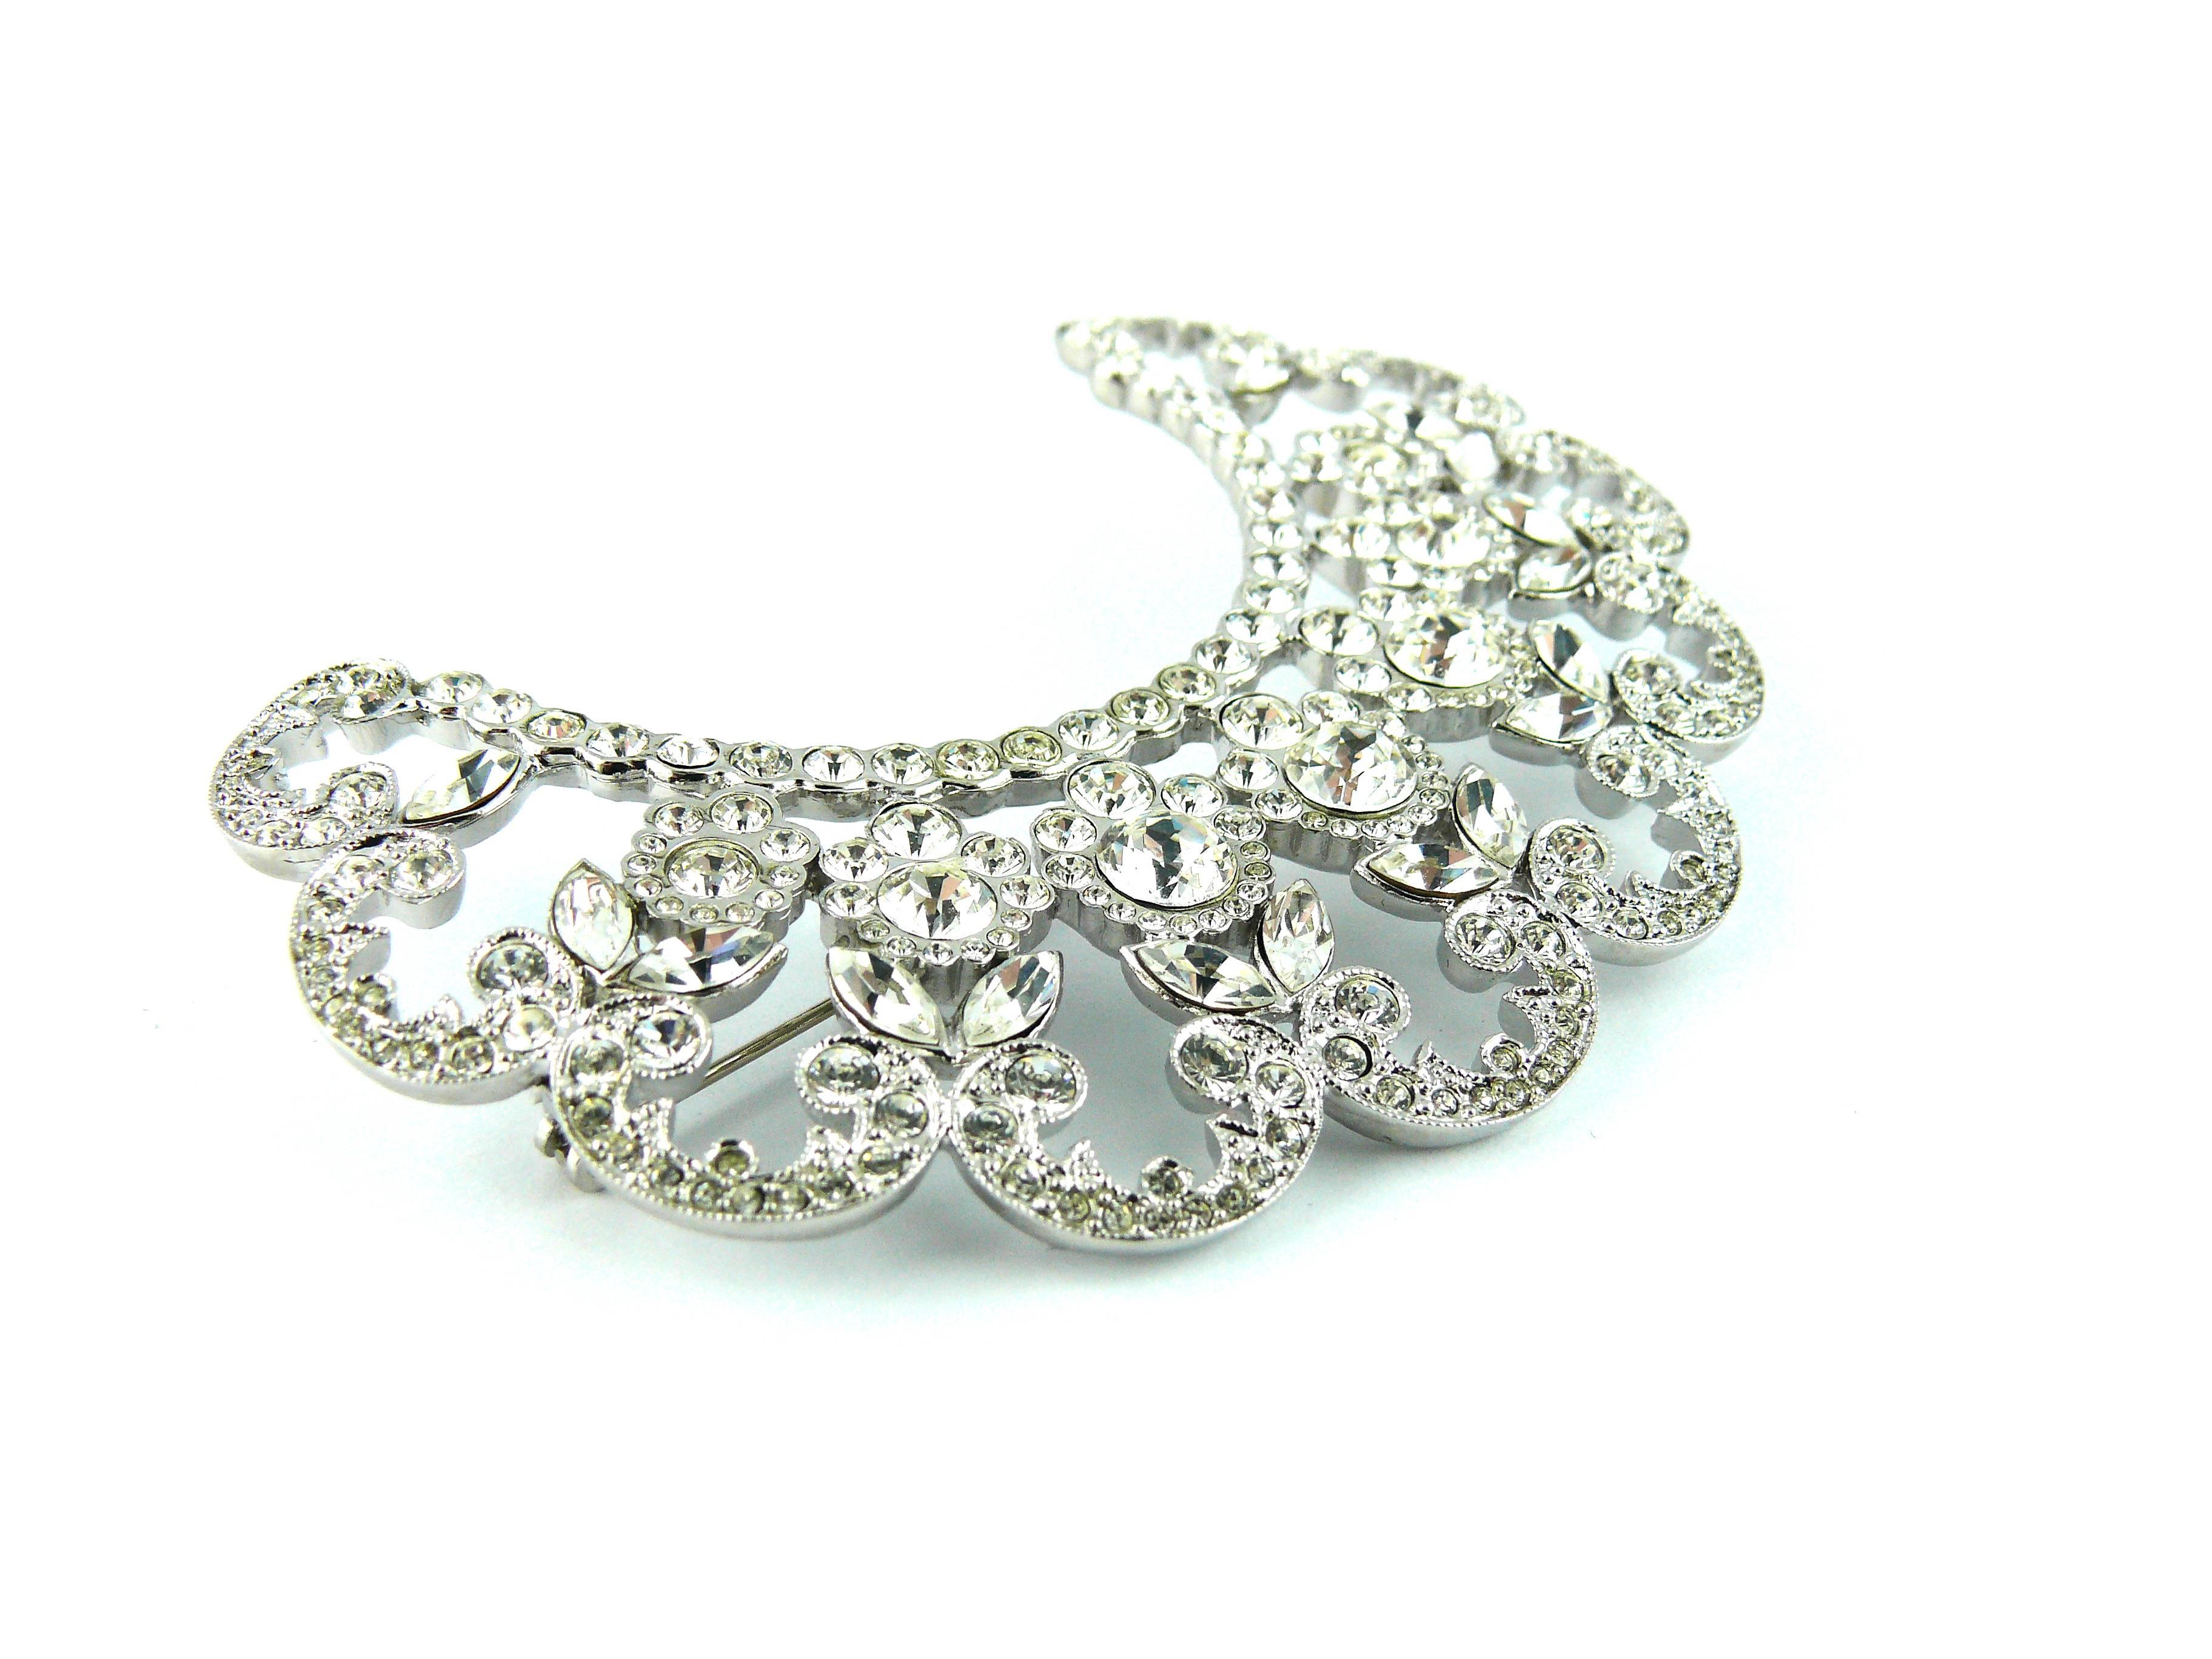 CHRISTIAN DIOR lovely floral diamante crescent brooch in a silver tone setting.

Marked DIOR.

JEWELRY CONDITION CHART
- New or never worn : item is in pristine condition with no noticeable imperfections
- Excellent : item has been used and may have